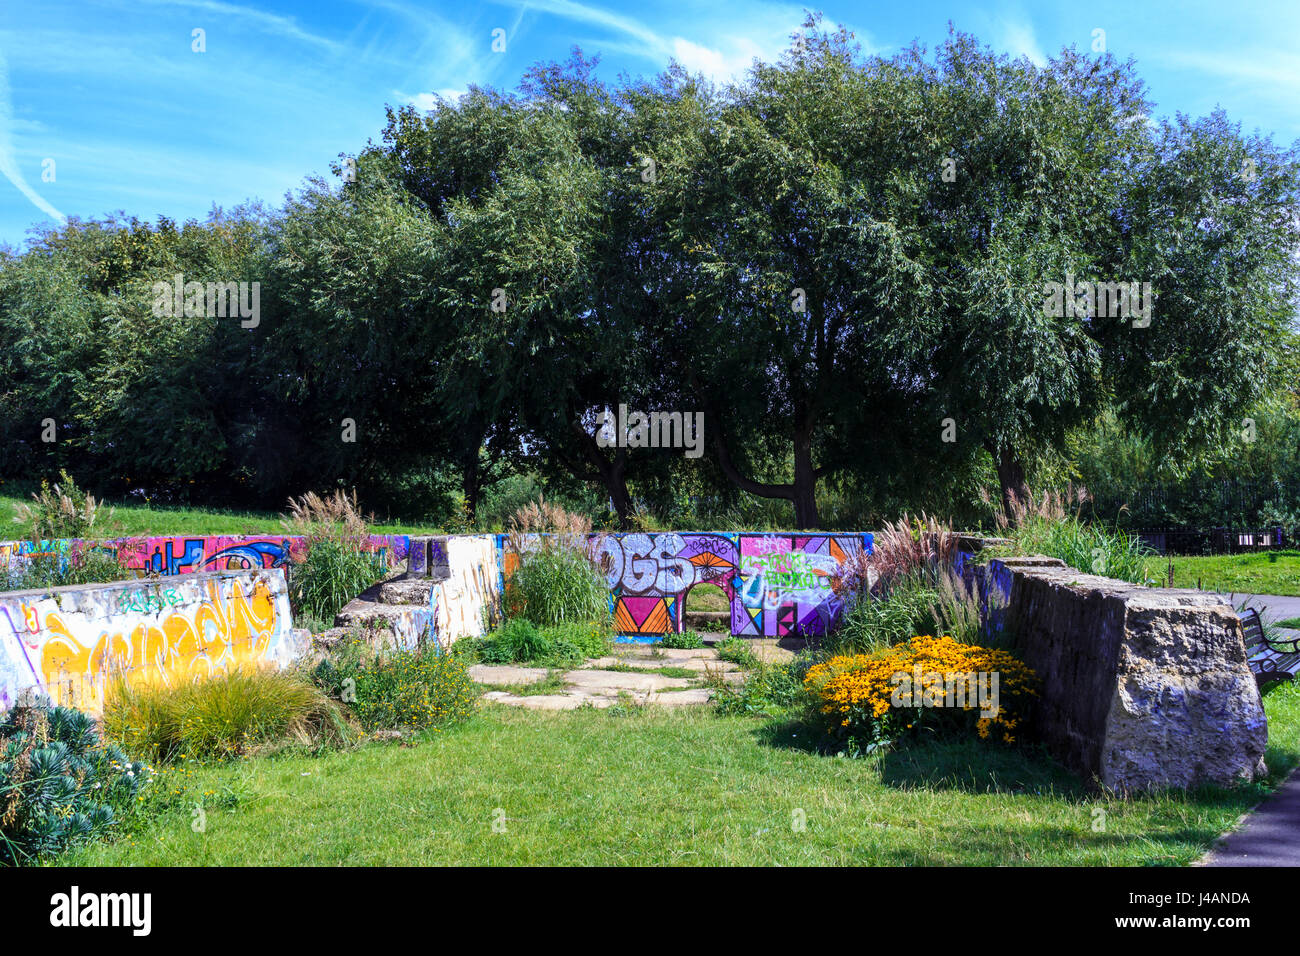 The Victorian sewer beds in Markfield Park, Tottenham, London, UK, planted with wild flowers and decorated with graffiti Stock Photo